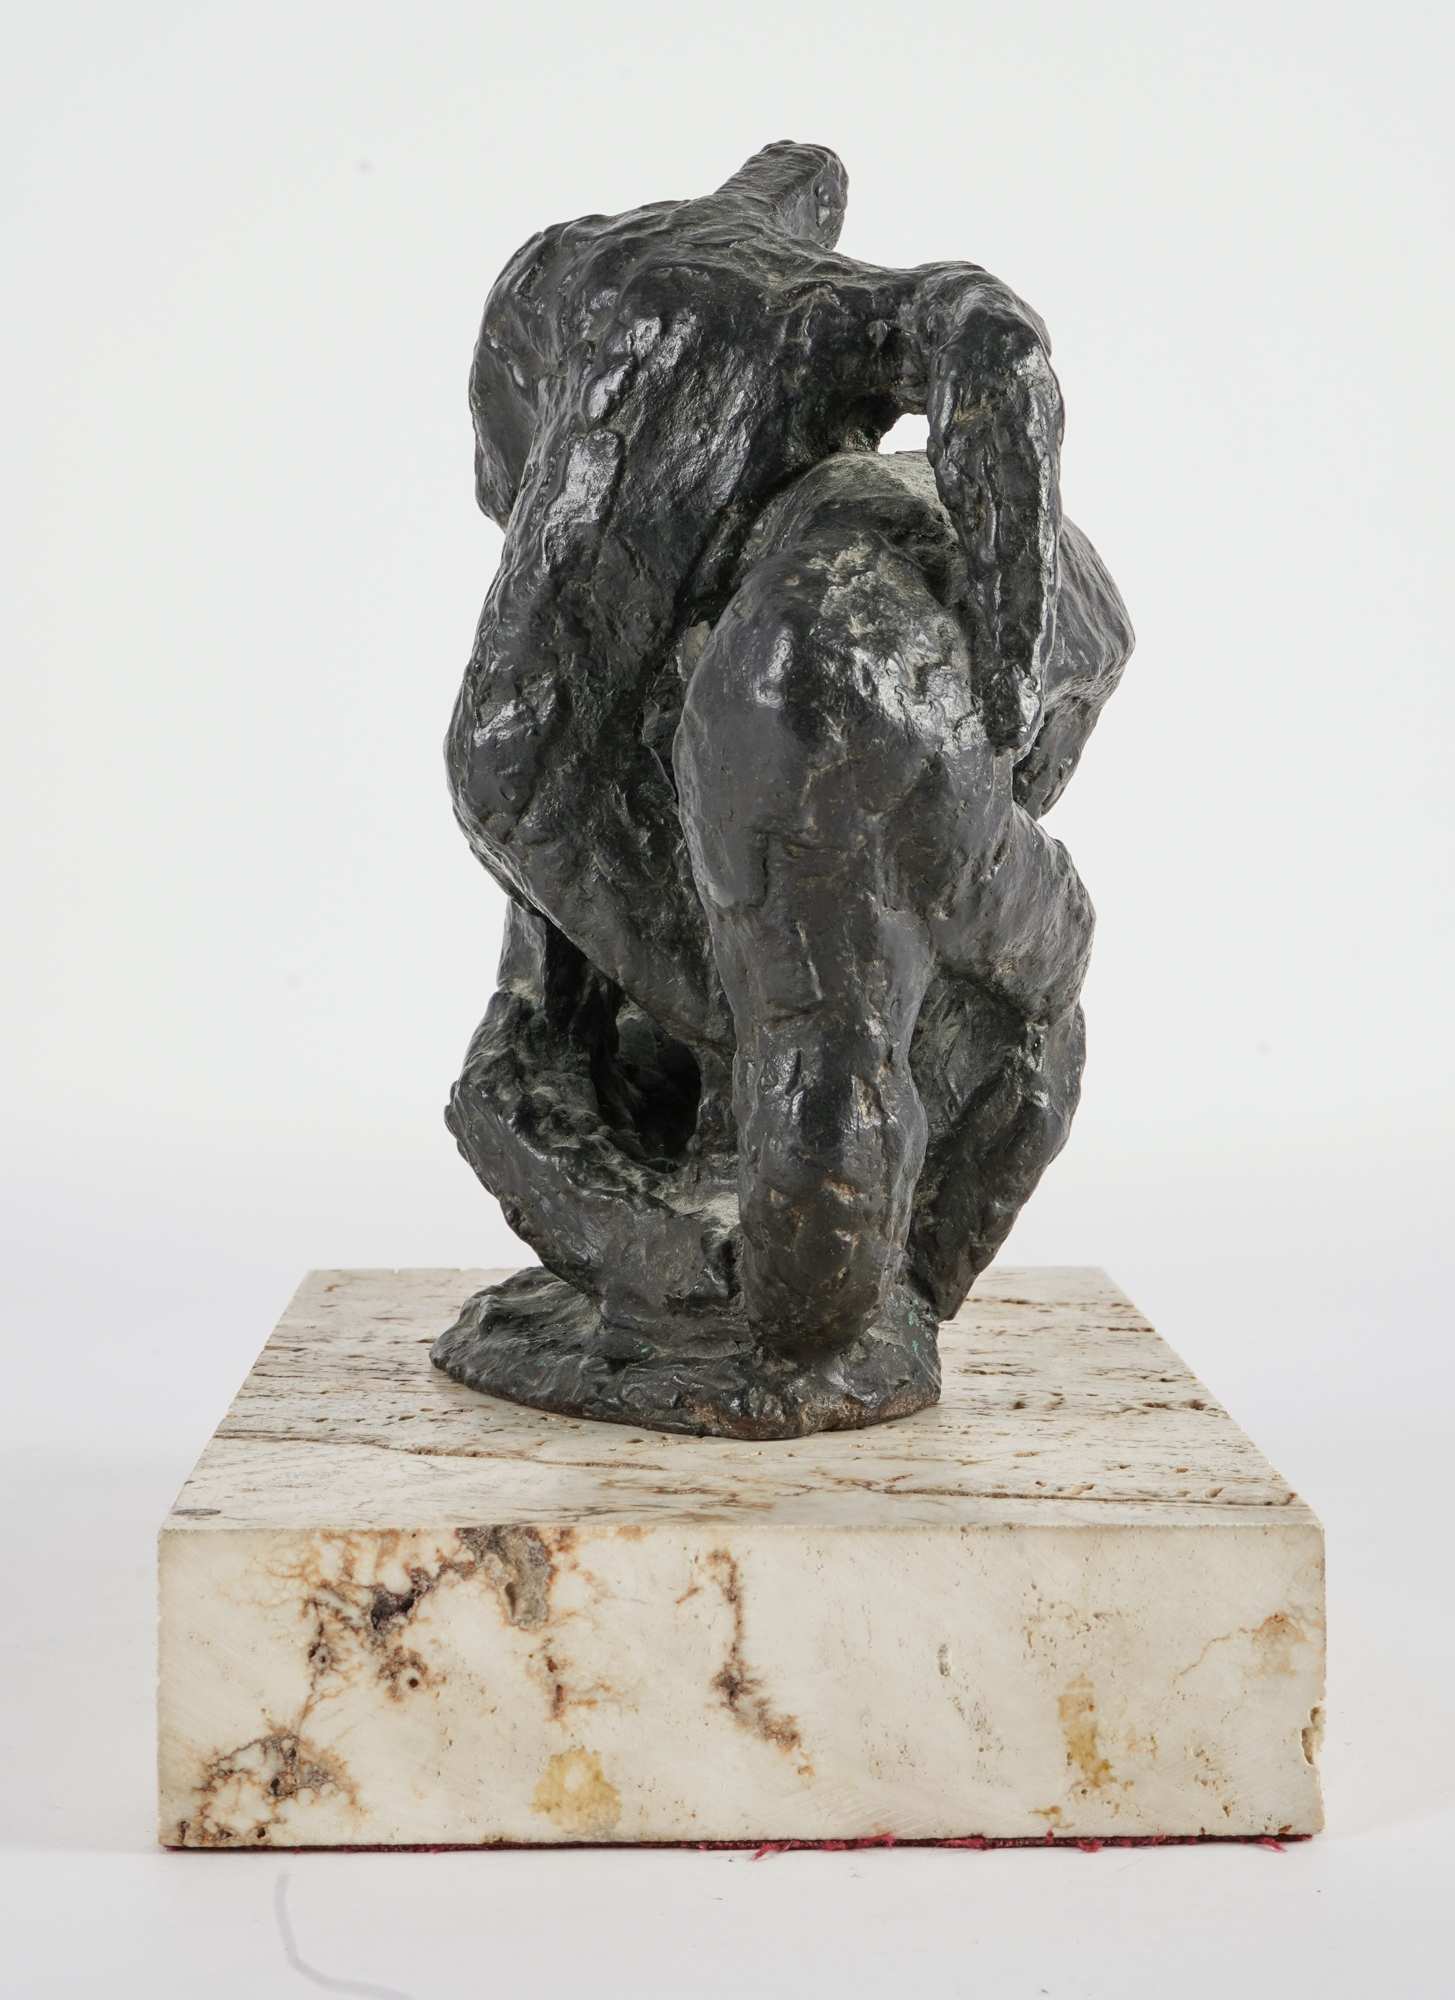 Artwork by Wessel Couzijn, Struggle, Made of bronze